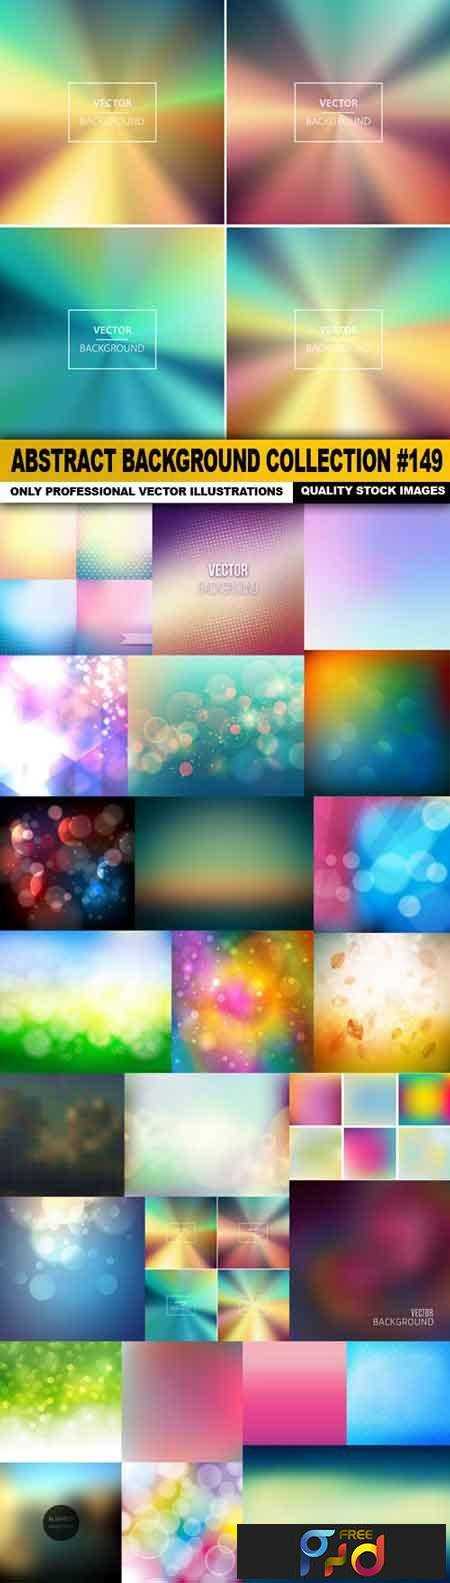 FreePsdVn.com_VECTOR_1701342_abstract_background_collection_149_25_vector